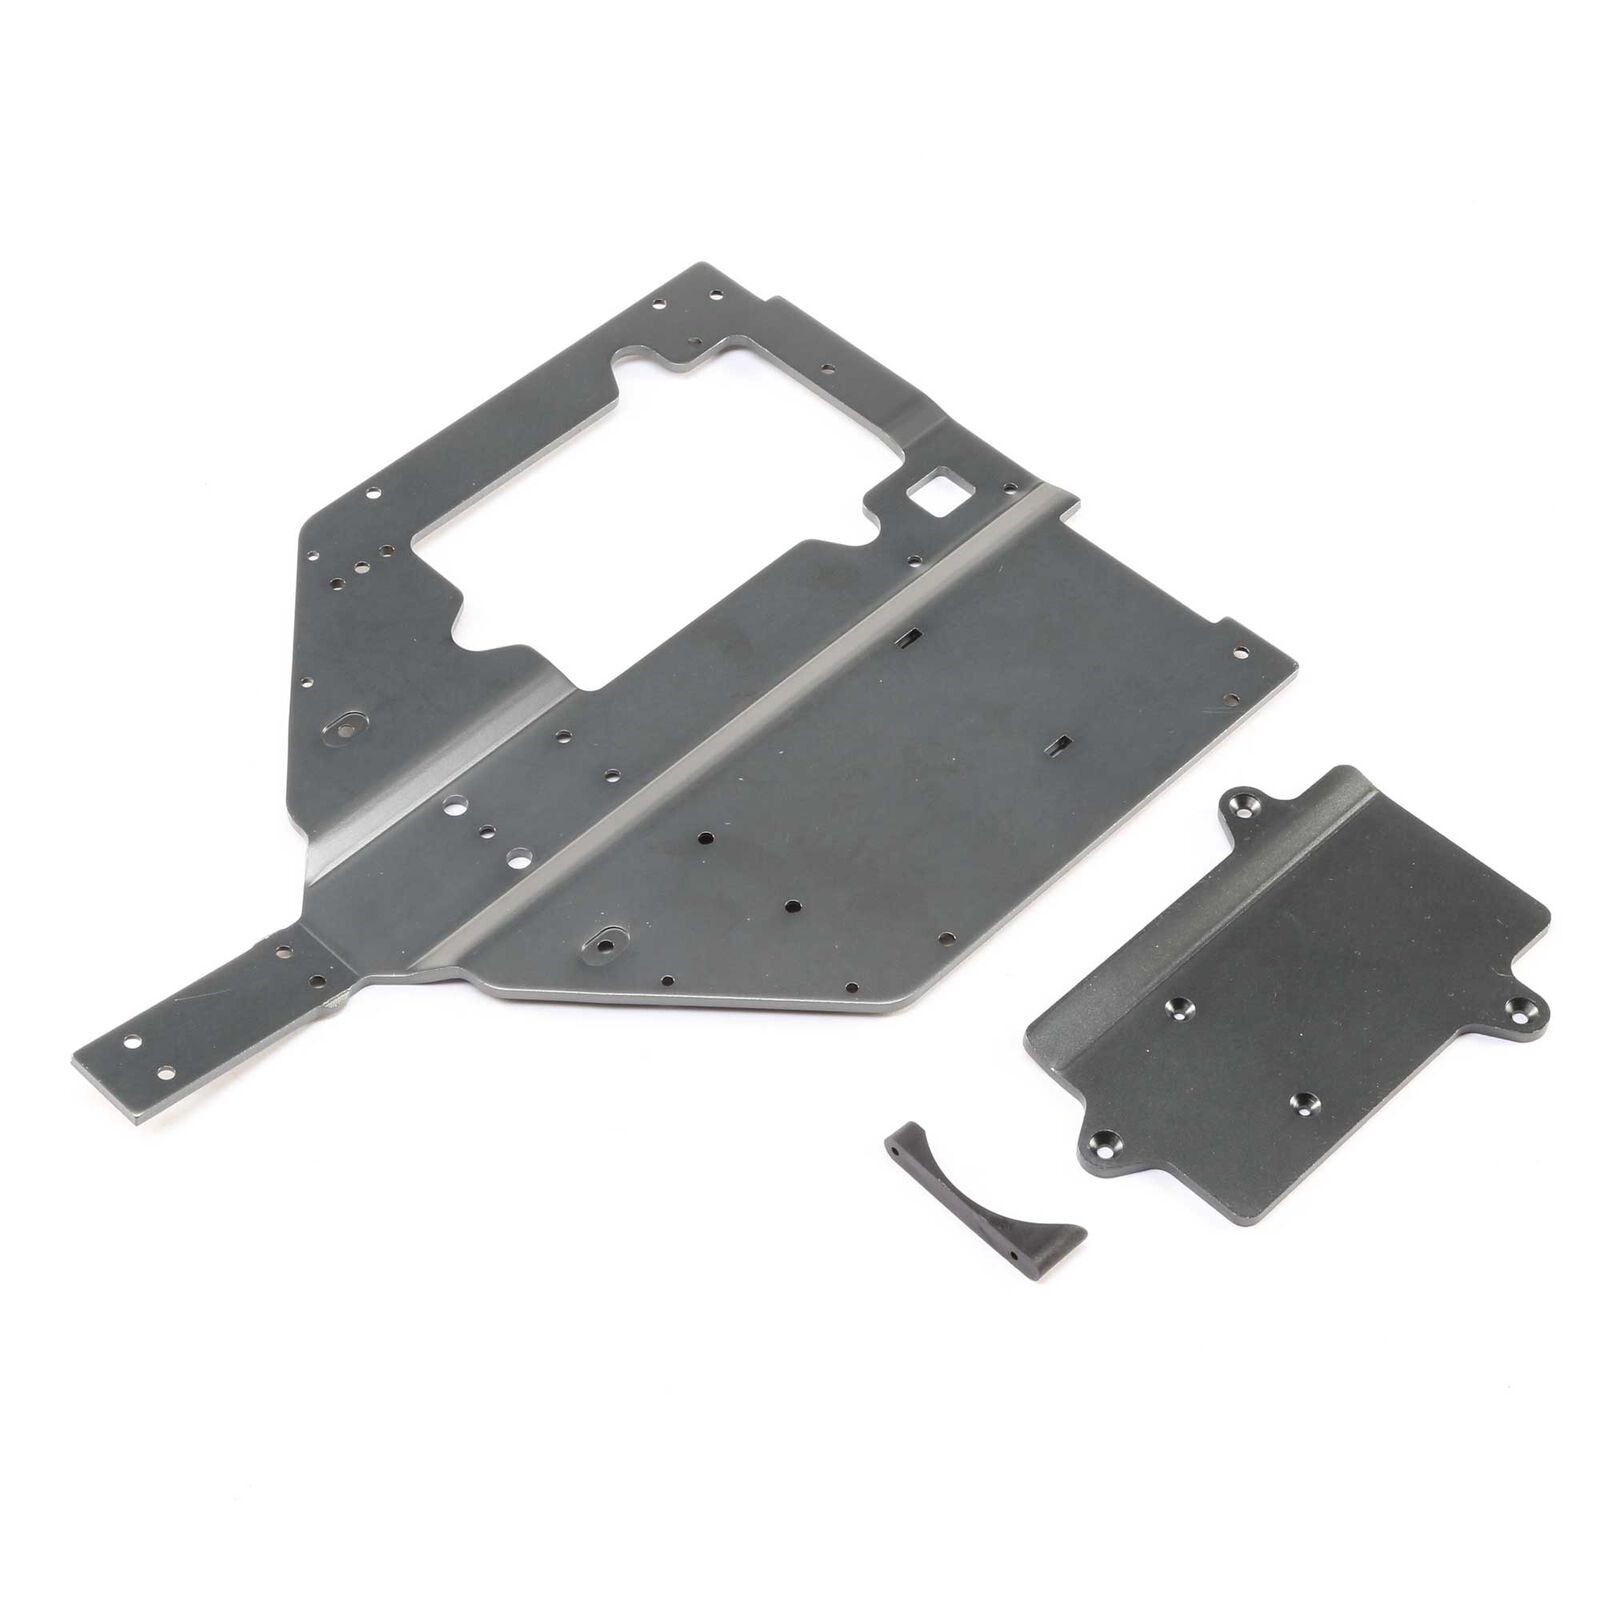 Chassis and Motor Cover Plate: Super Baja Rey